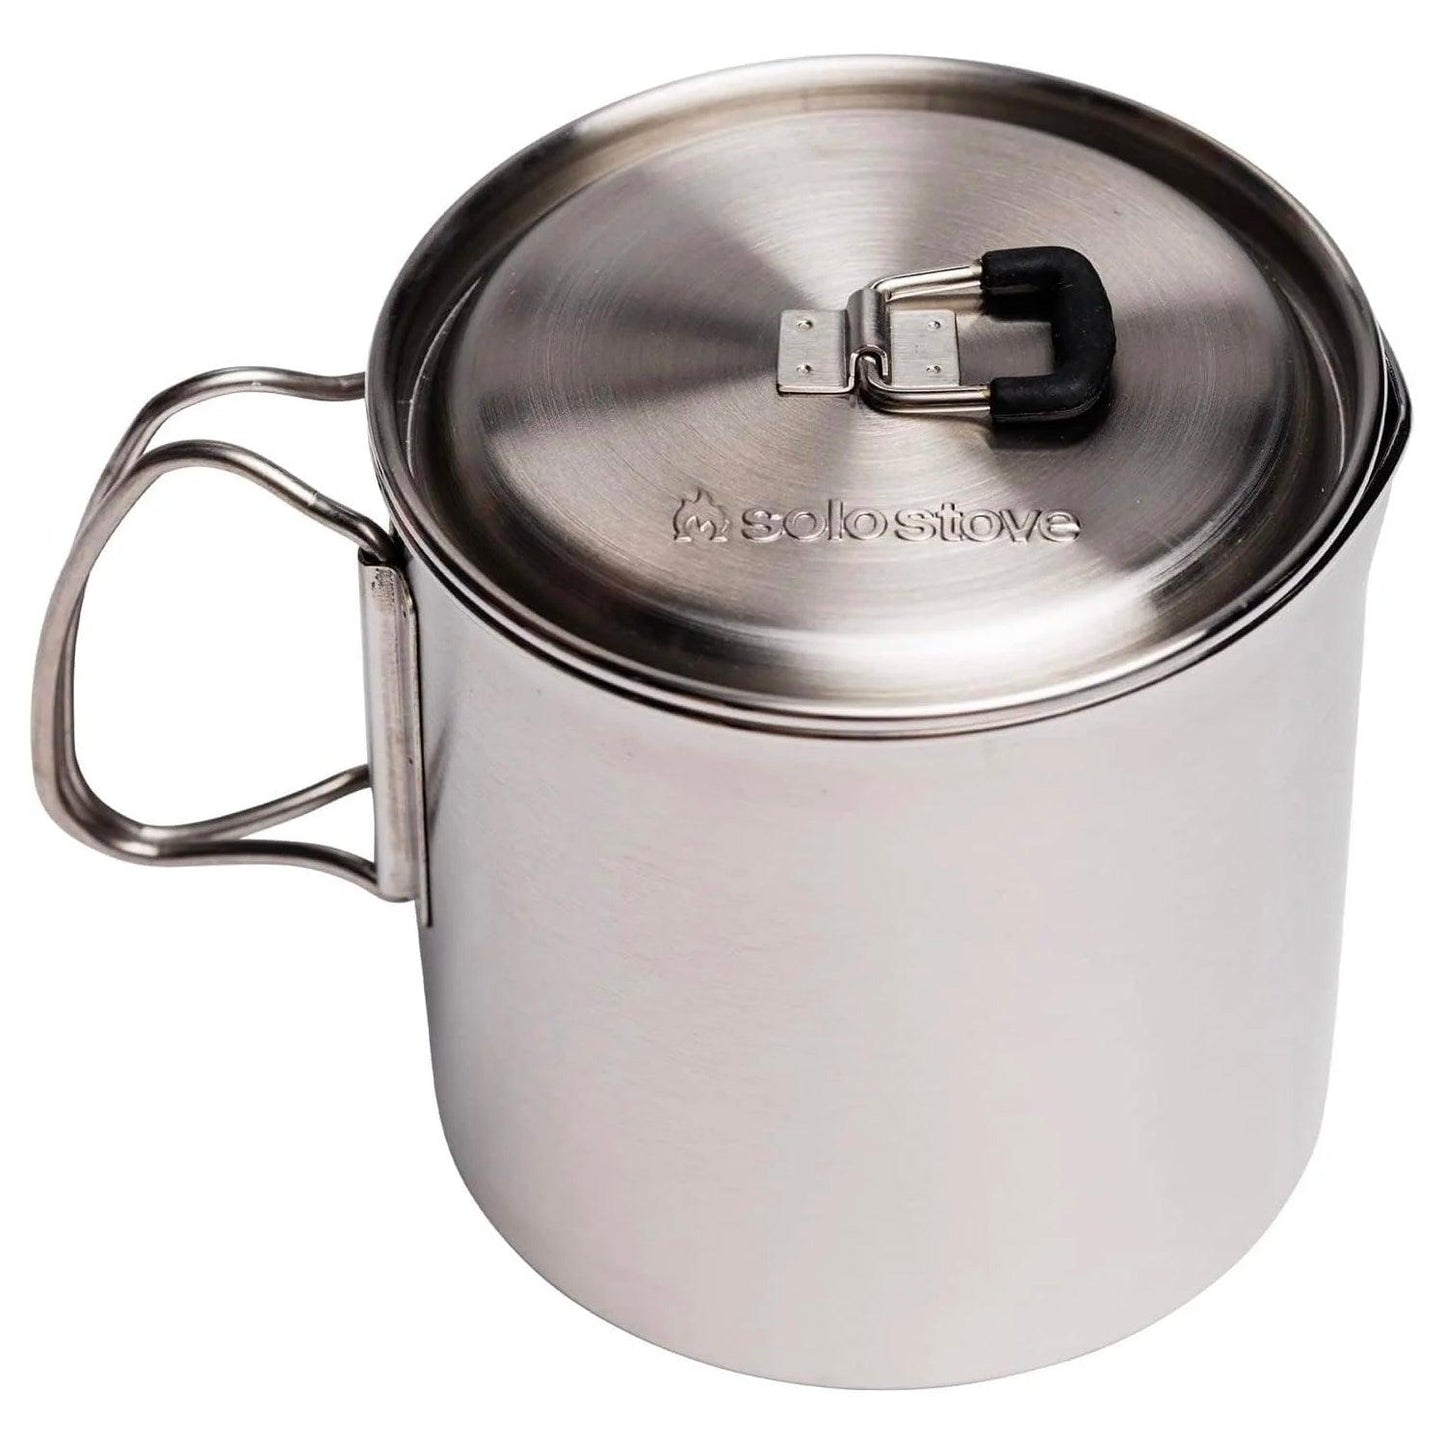 Solo Stove Pot 900/1800/4000 Stainless Steel Companion Pots | Lightweight Aluminum Pot Holding Tripod | Great Portable Cookware for Backpacking, Camping & Survival Adventures | Deisgned for use with Lite/Titan/Campfire Solo Stoves - TRAPSKI, LLC